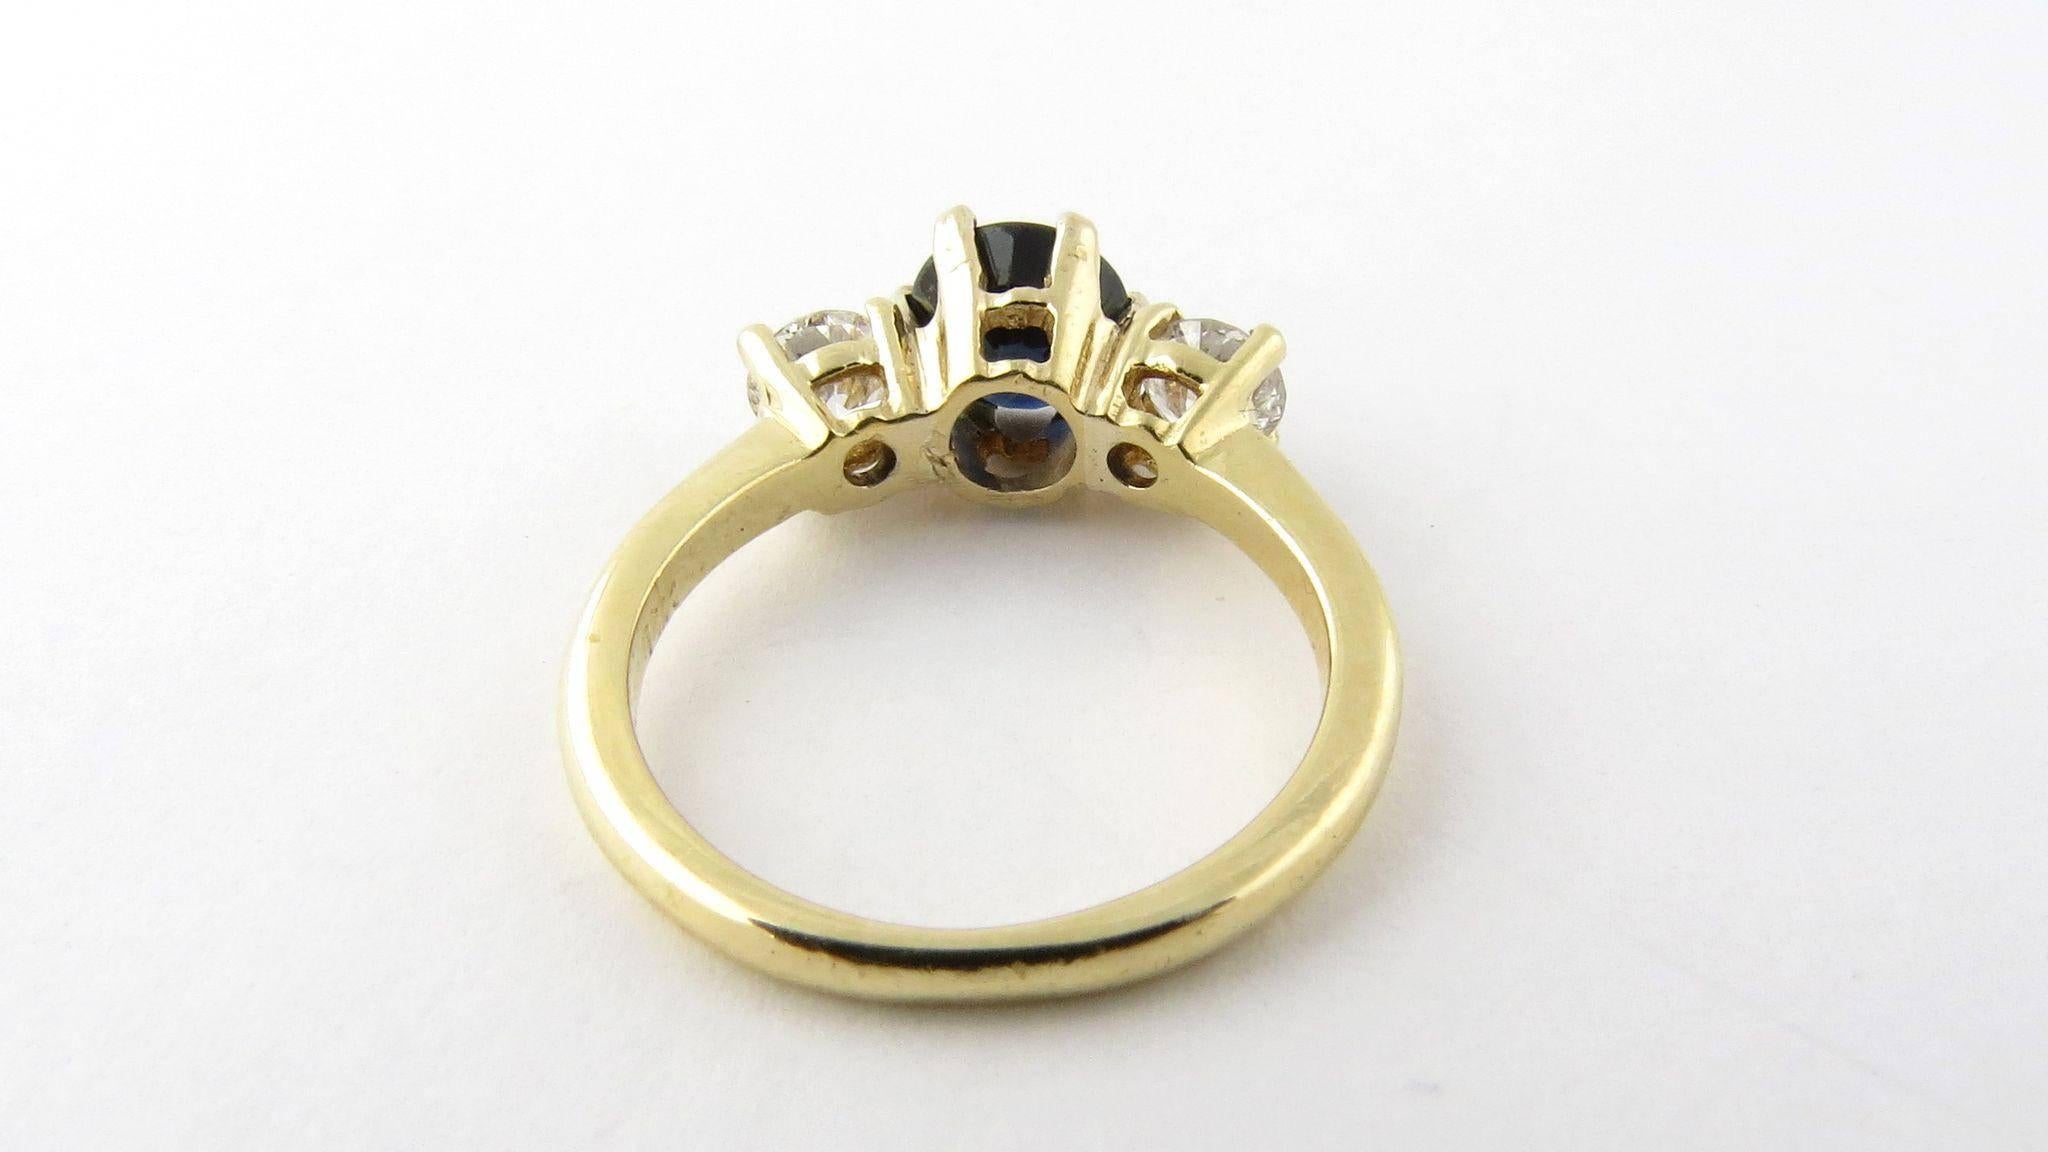 Vintage 14K Yellow Gold Diamond and Sapphire Ring Size 4.75 

This gorgeous sapphire and diamond ring is set with two round brilliant diamonds and one larger deep blue genuine sapphire. 

Round brilliant diamonds are approximately .25 carats each